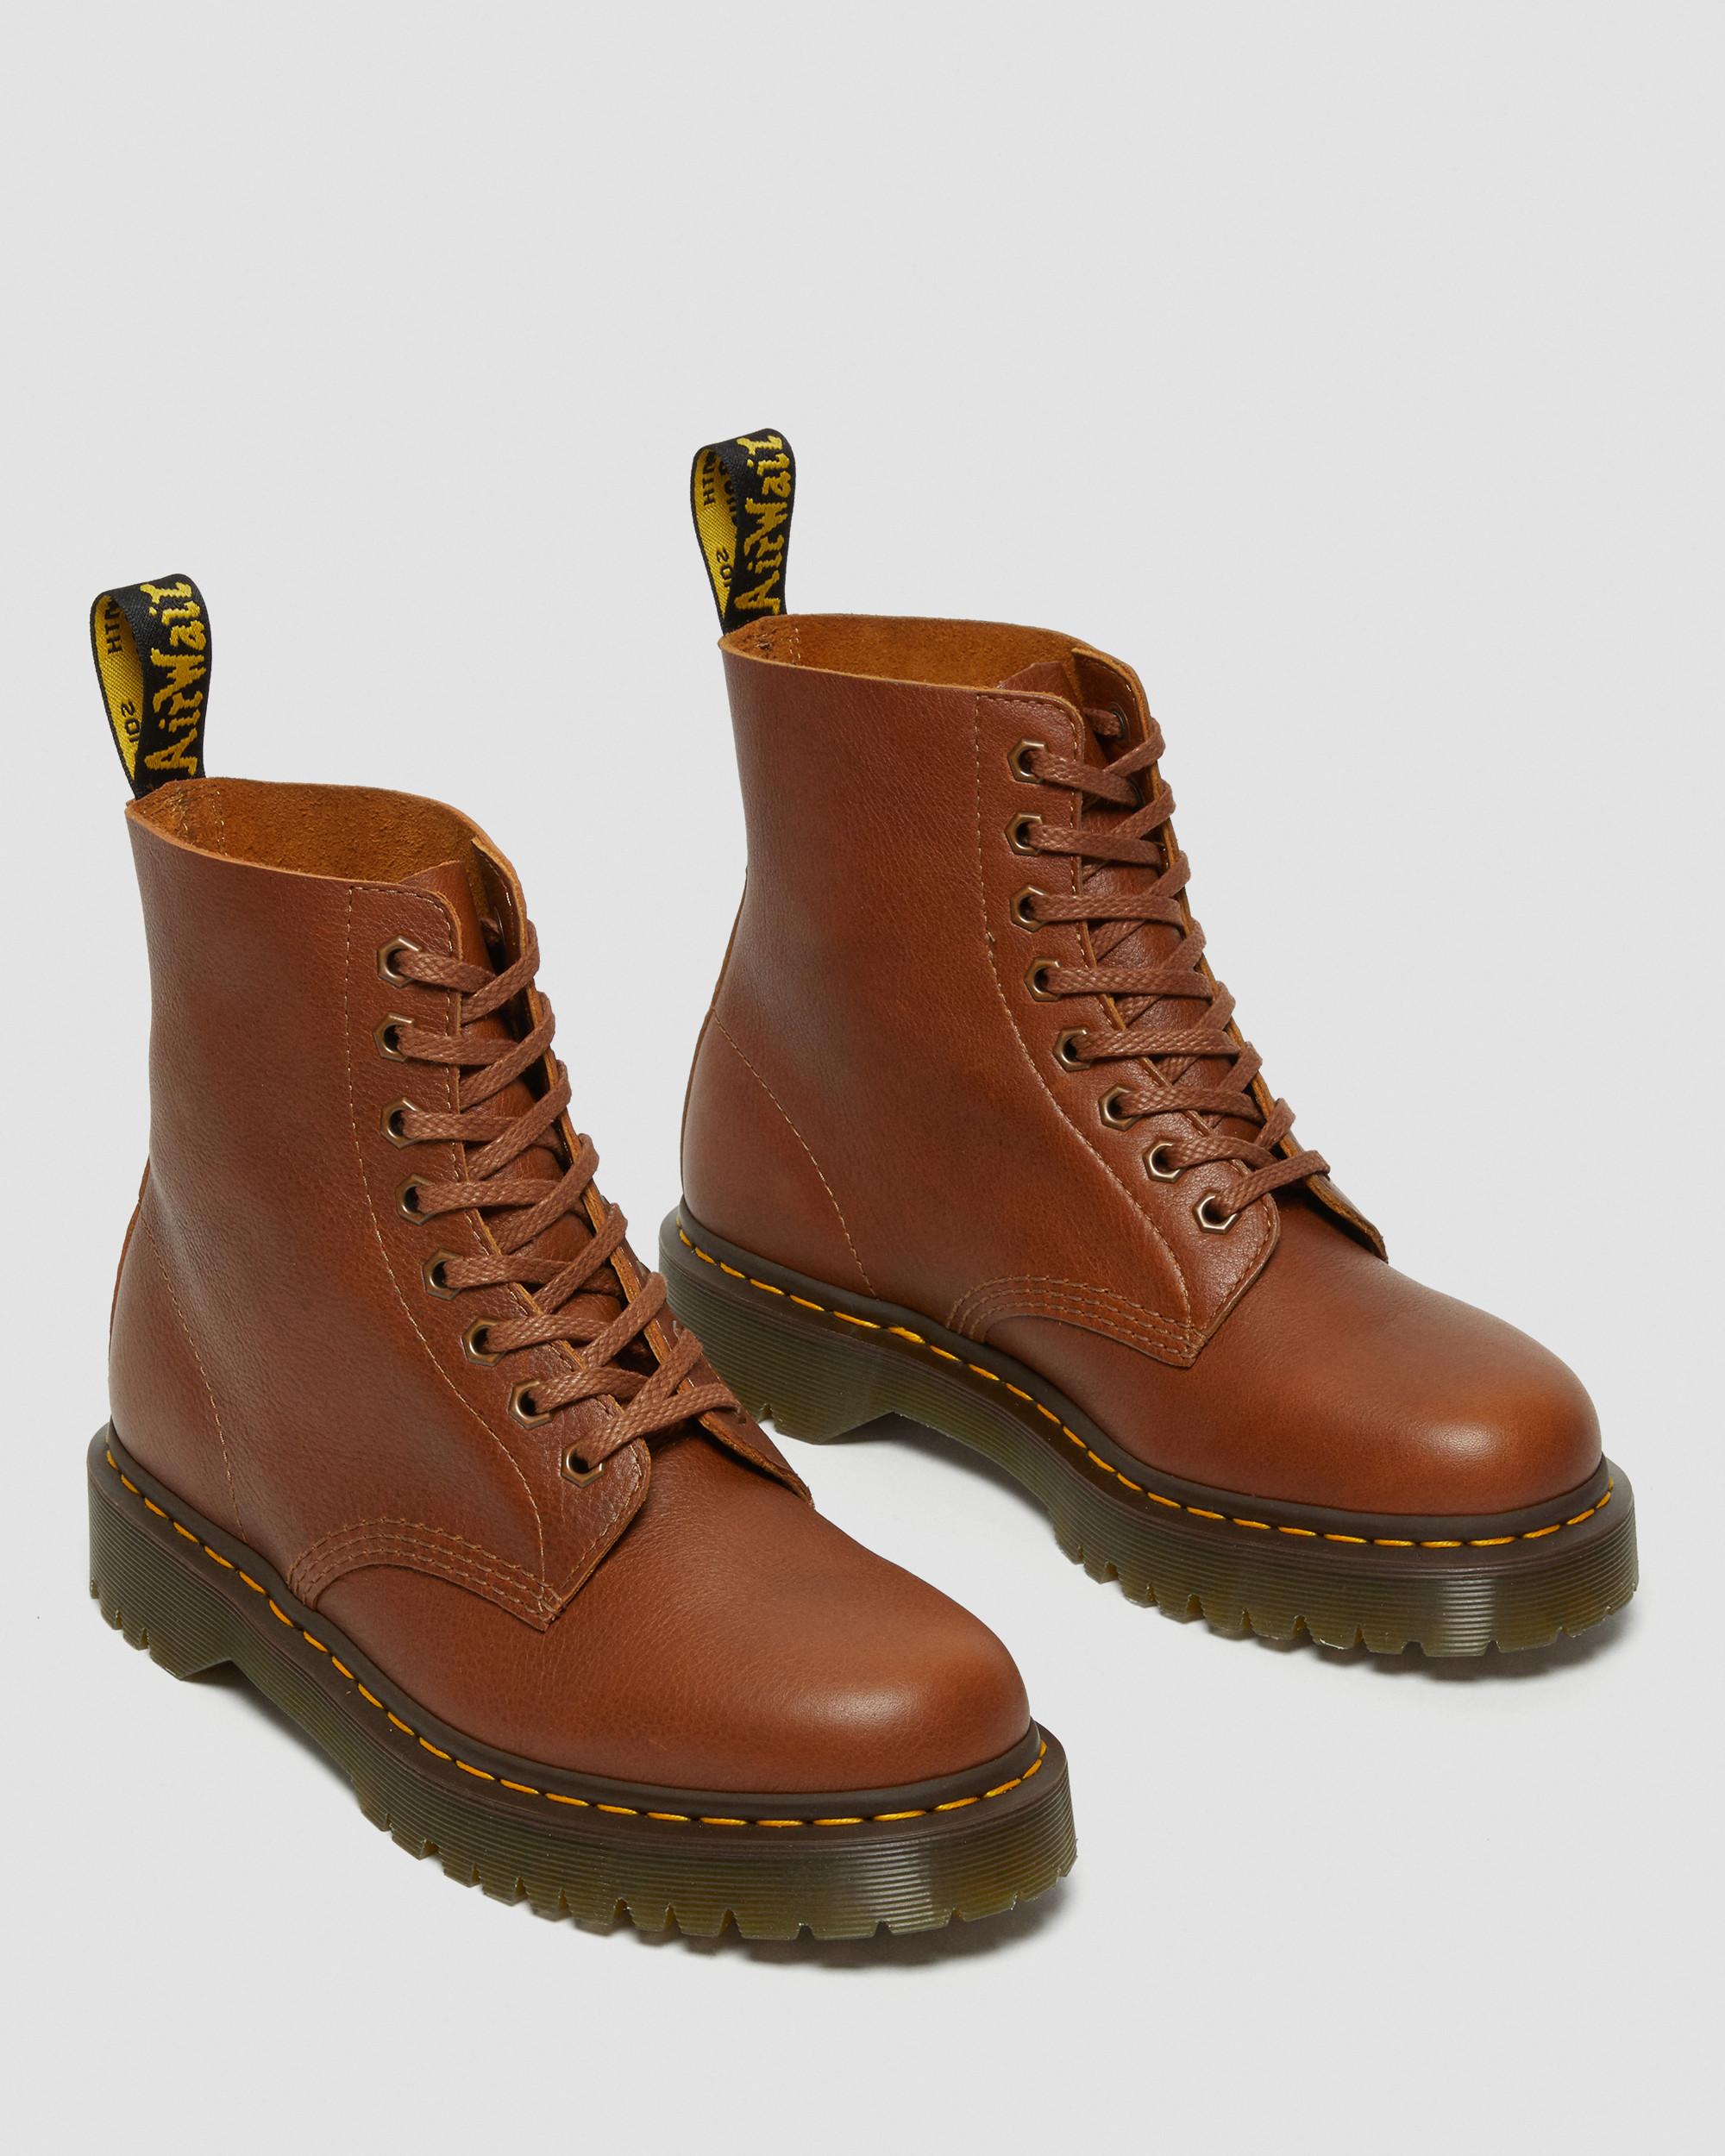 DR MARTENS 1460 Pascal Bex Leather Lace Up Boots